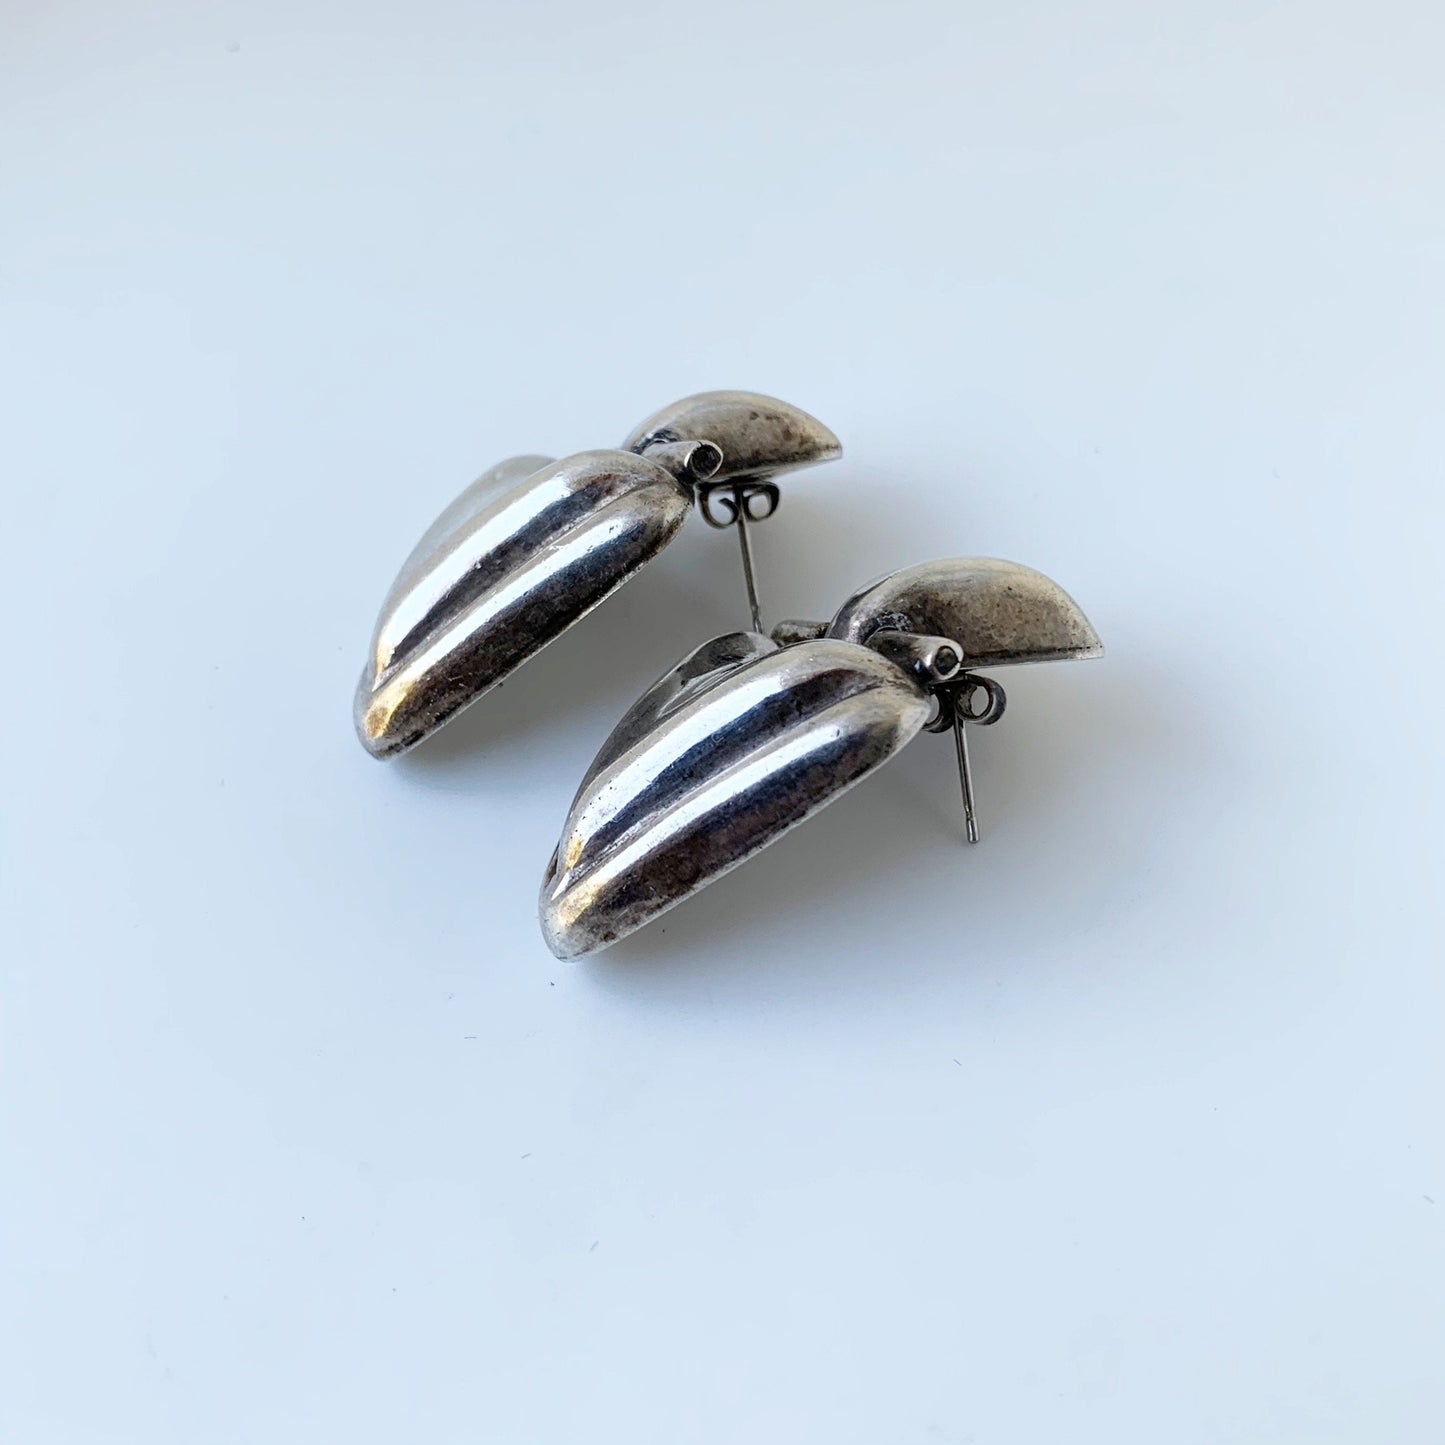 Vintage Mexican Silver Modernist Earrings | Modernist Hinged Dangle Earrings | Large Silver Earrings